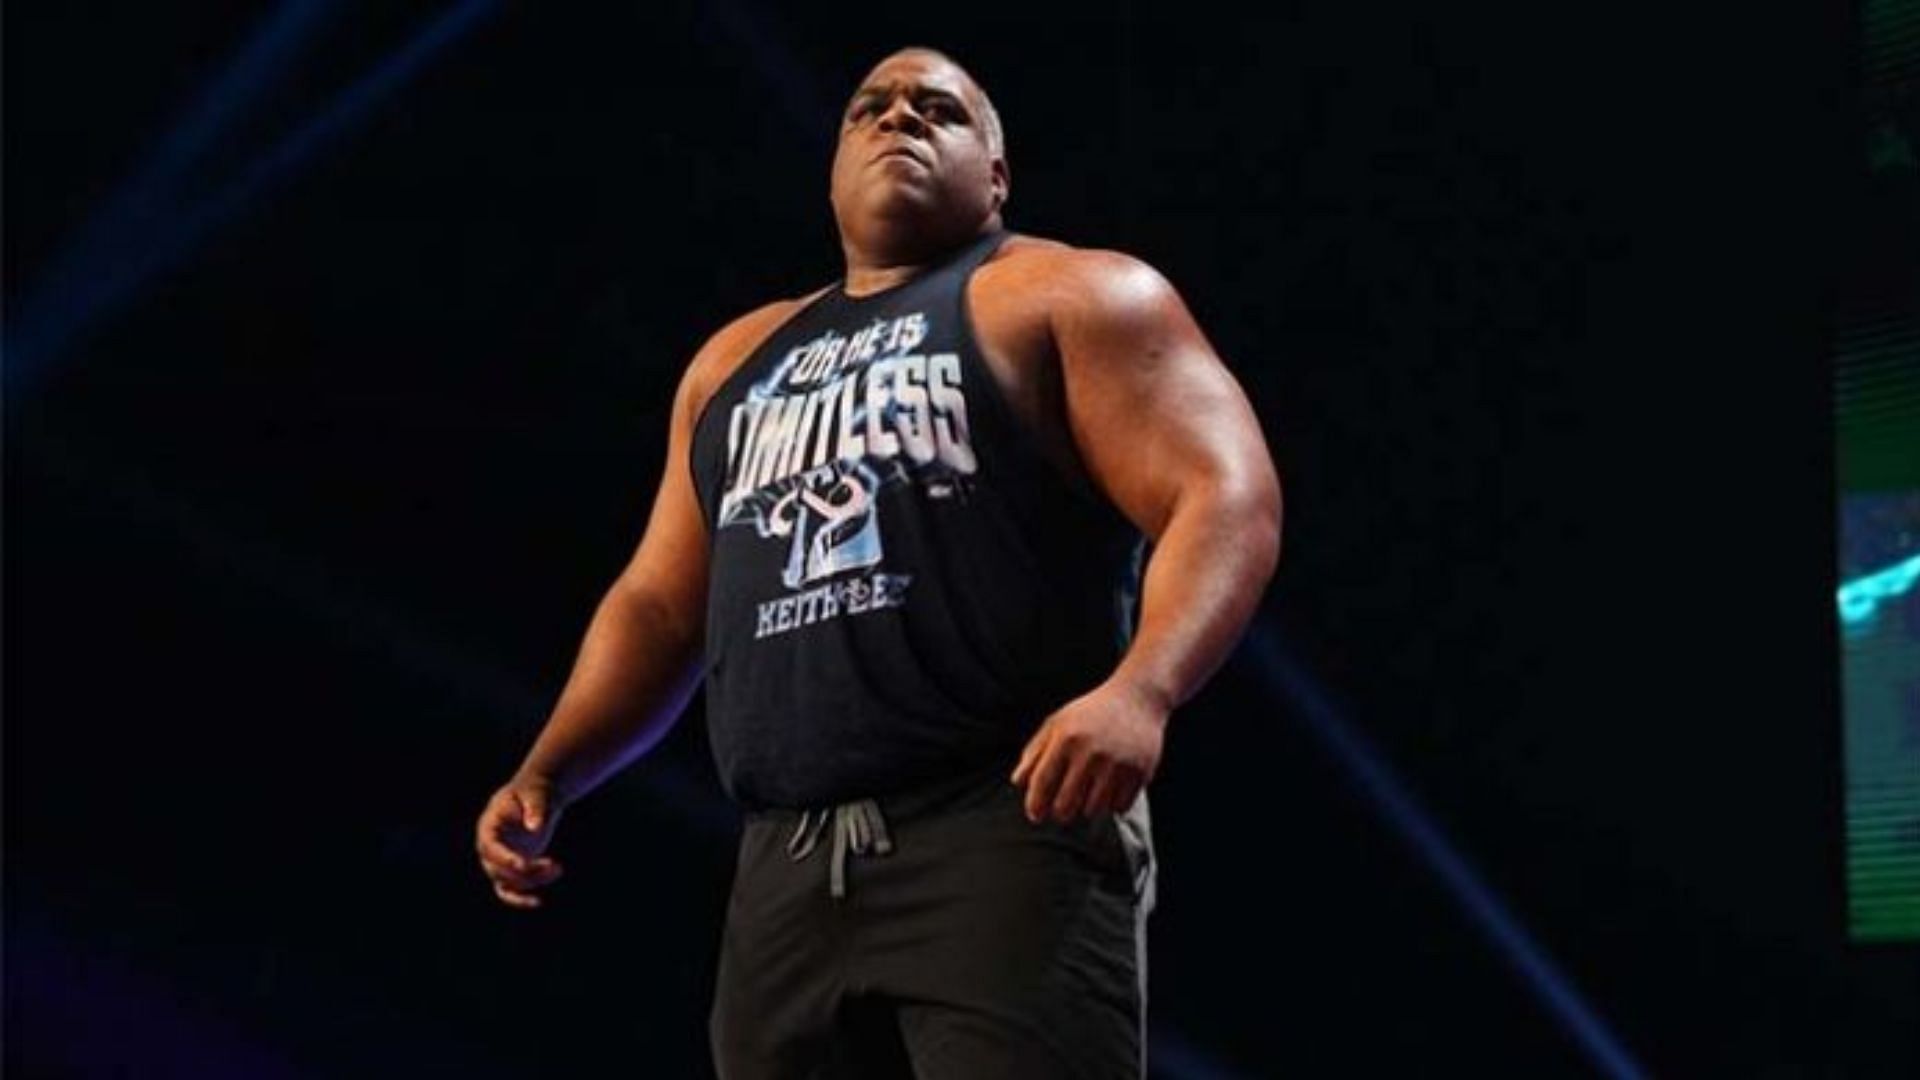 Keith Lee is a former NXT Champion